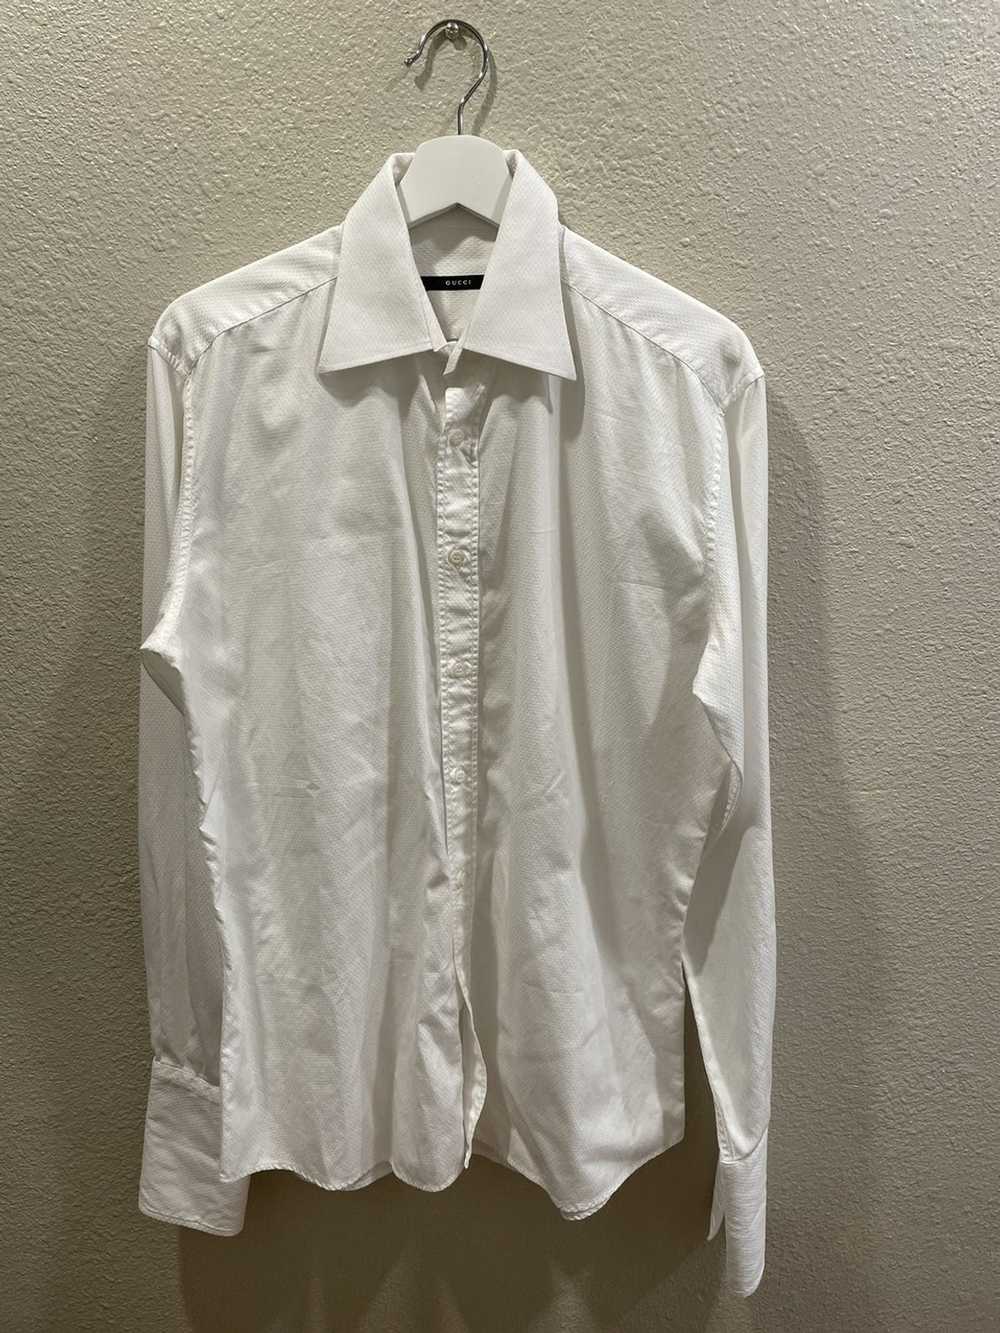 Gucci French cuff button up - image 1